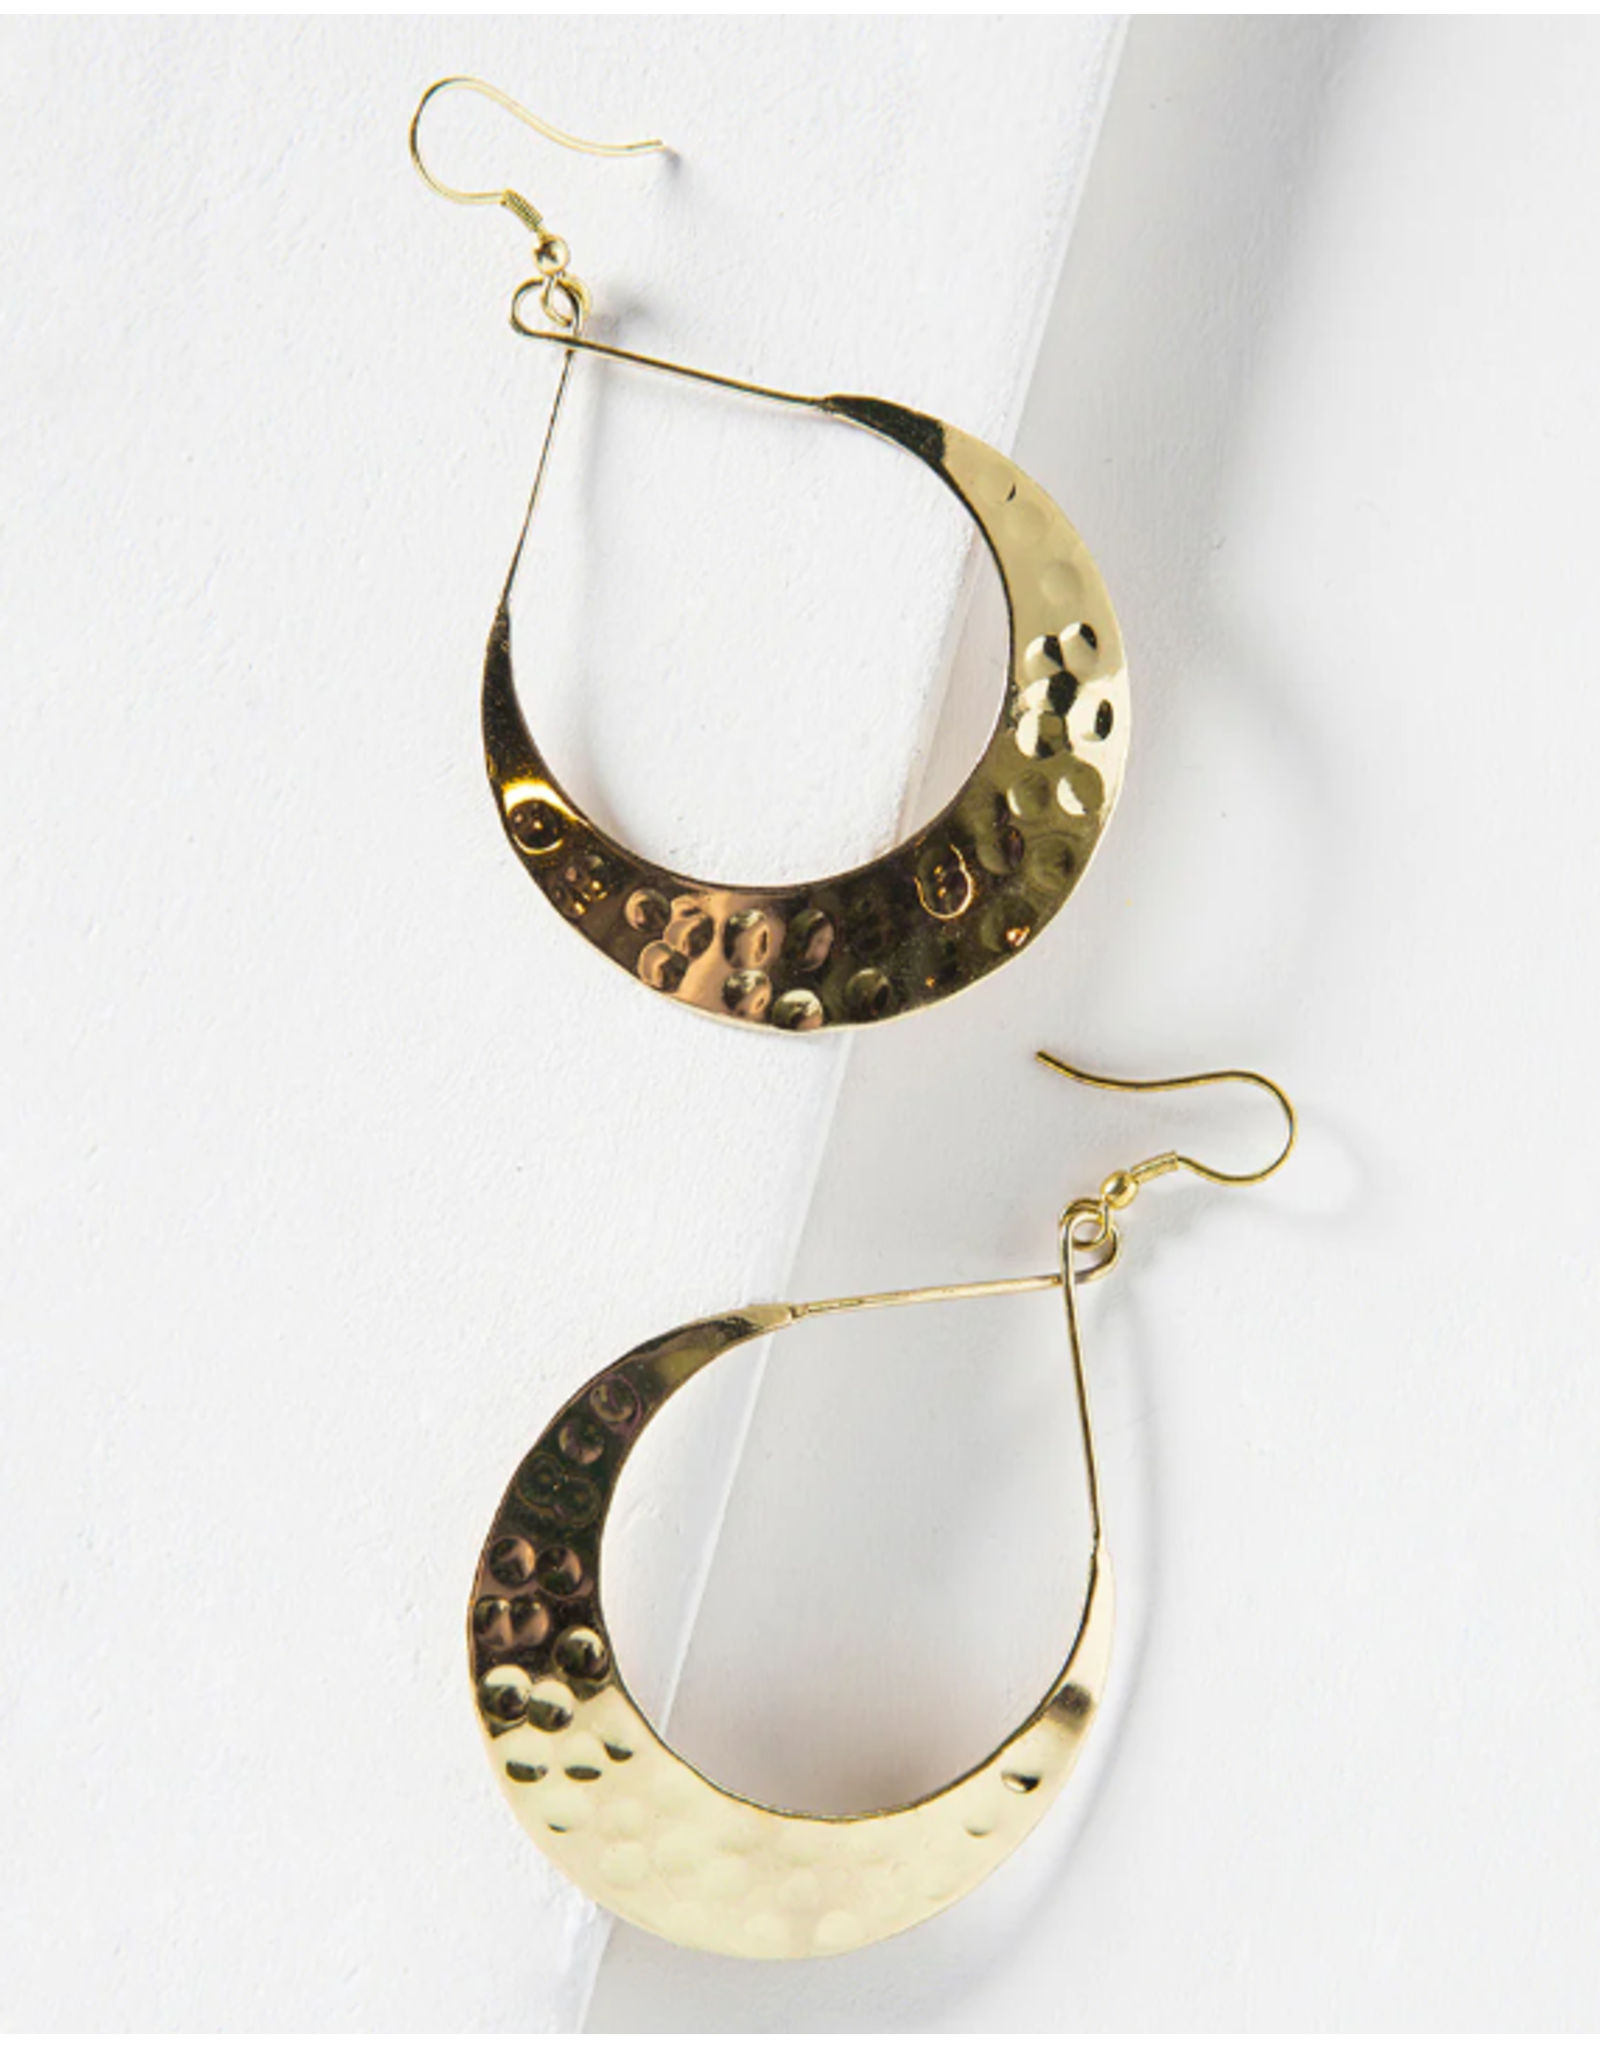 India Gold Lunar Crescent Earrings, India